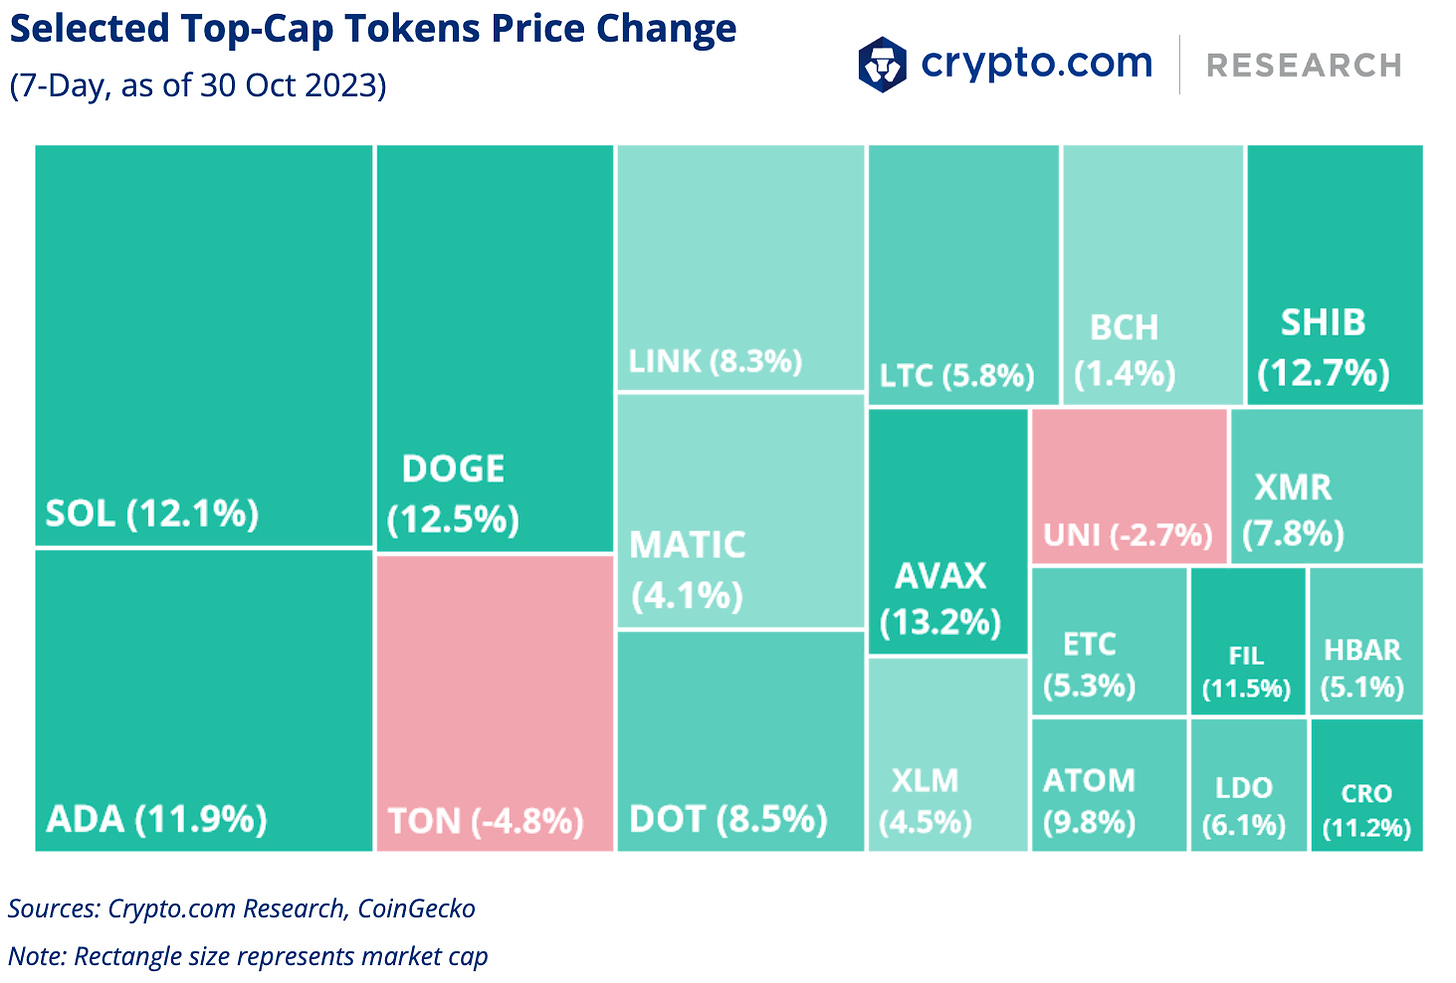 Crypto.com Selected Top Cap Tokens Price Change